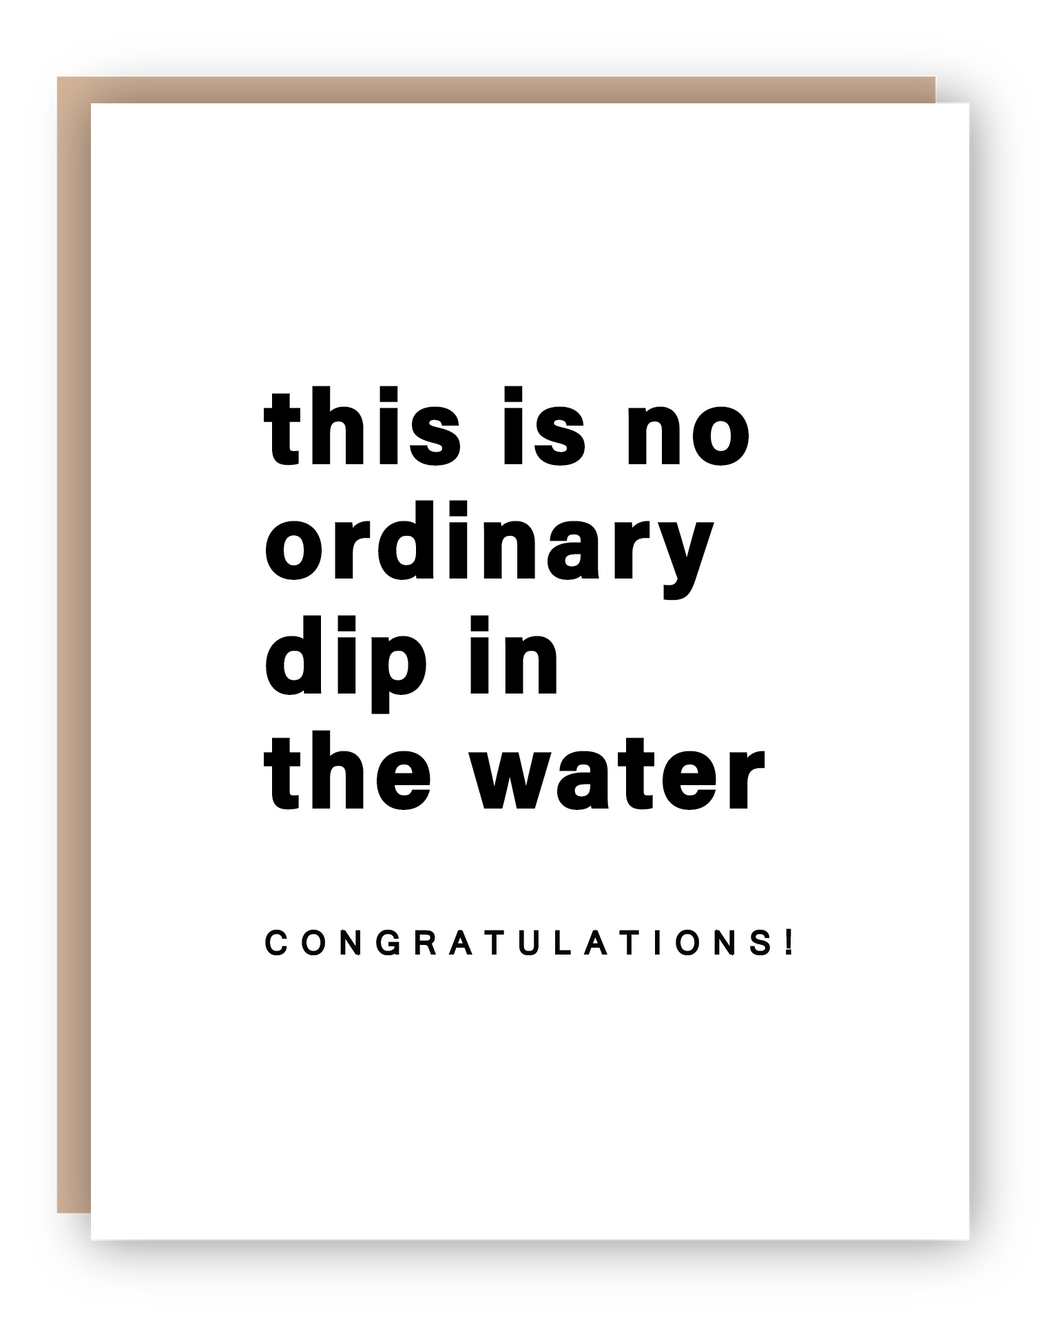 DIP IN THE WATER